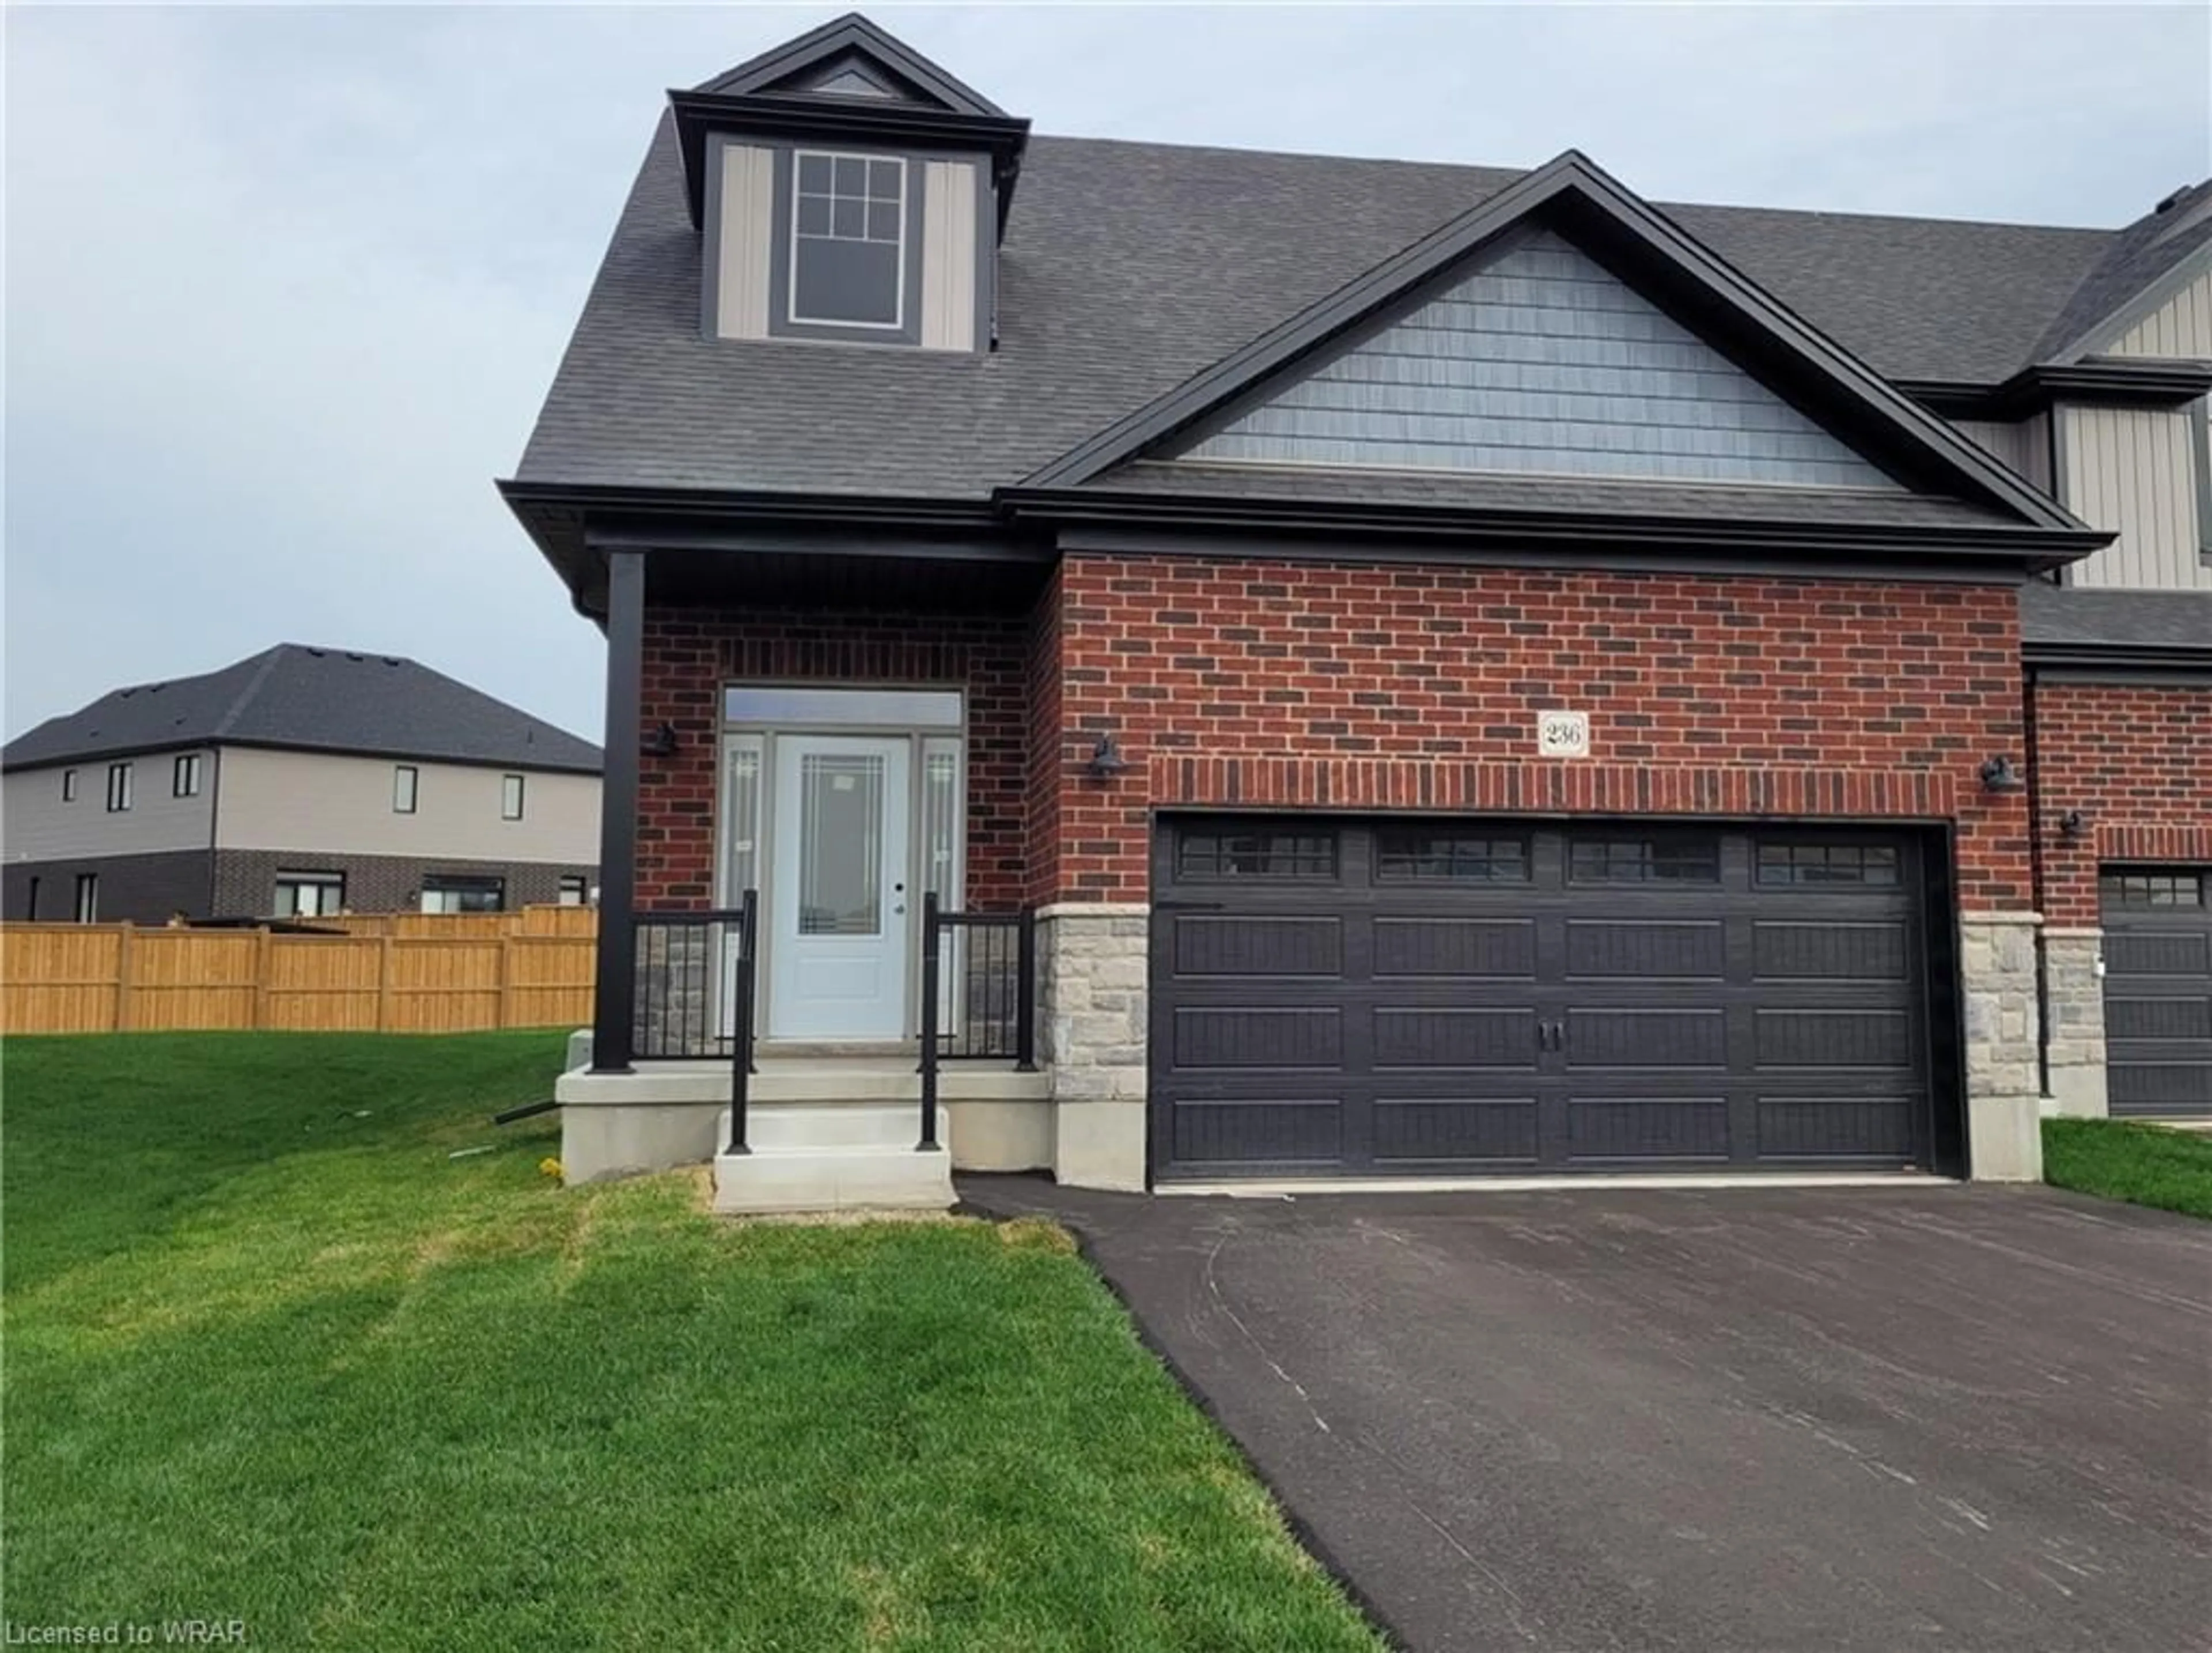 Home with brick exterior material for 236 Applewood St, Plattsville Ontario N0J 1S0